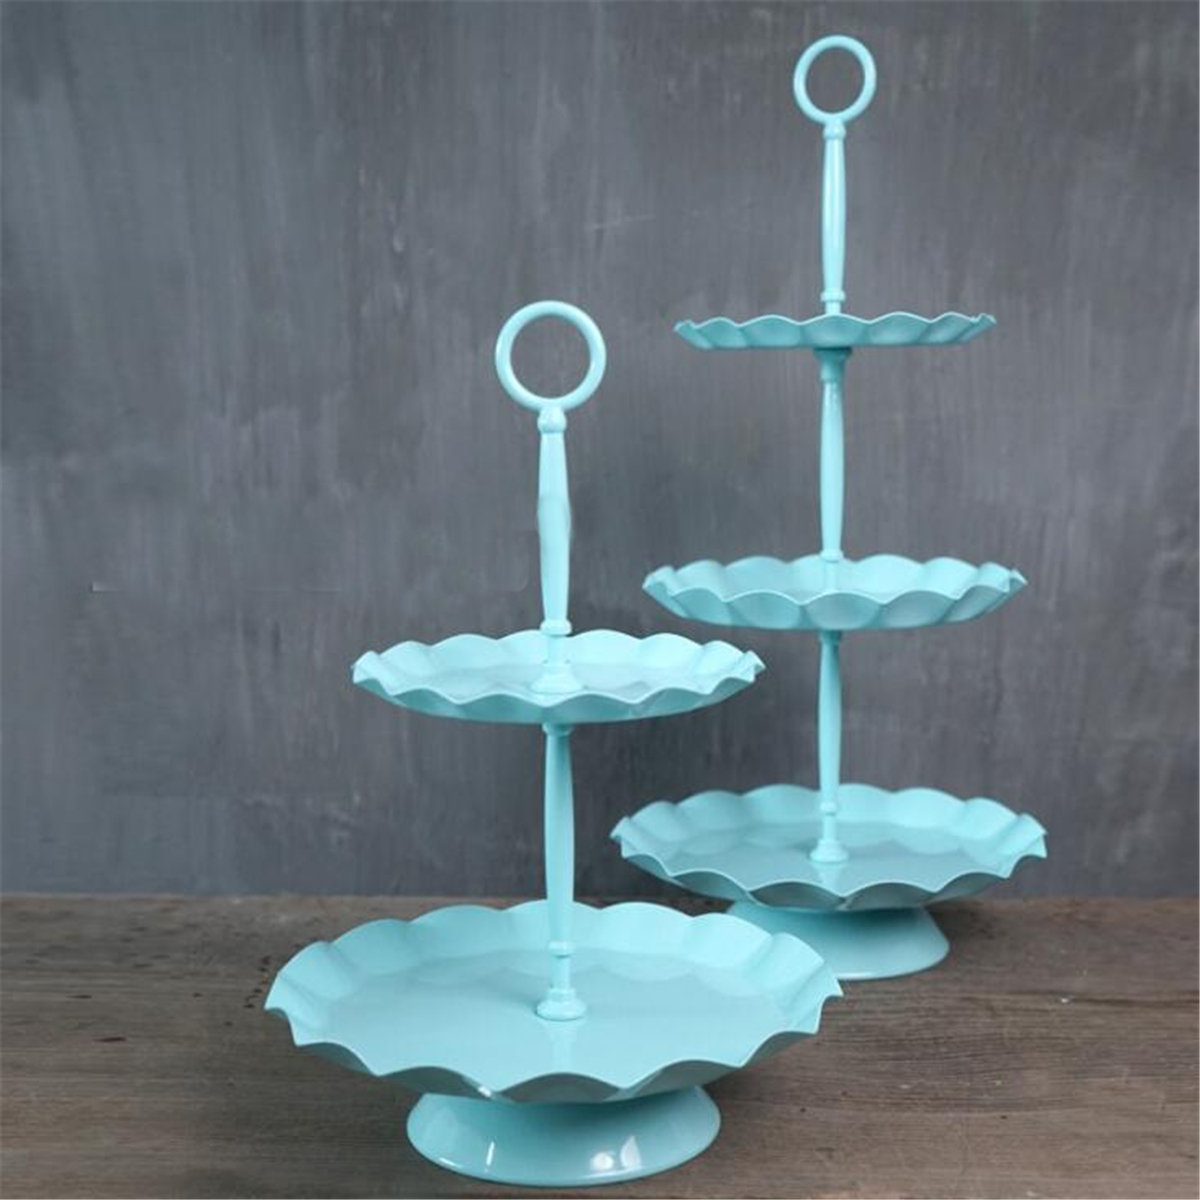 2--3-Ters-Blue-Cake-Holder-Cupcake-Stand-Birthday-Wedding-Party-Display-Holder-Decorations-1340743-6